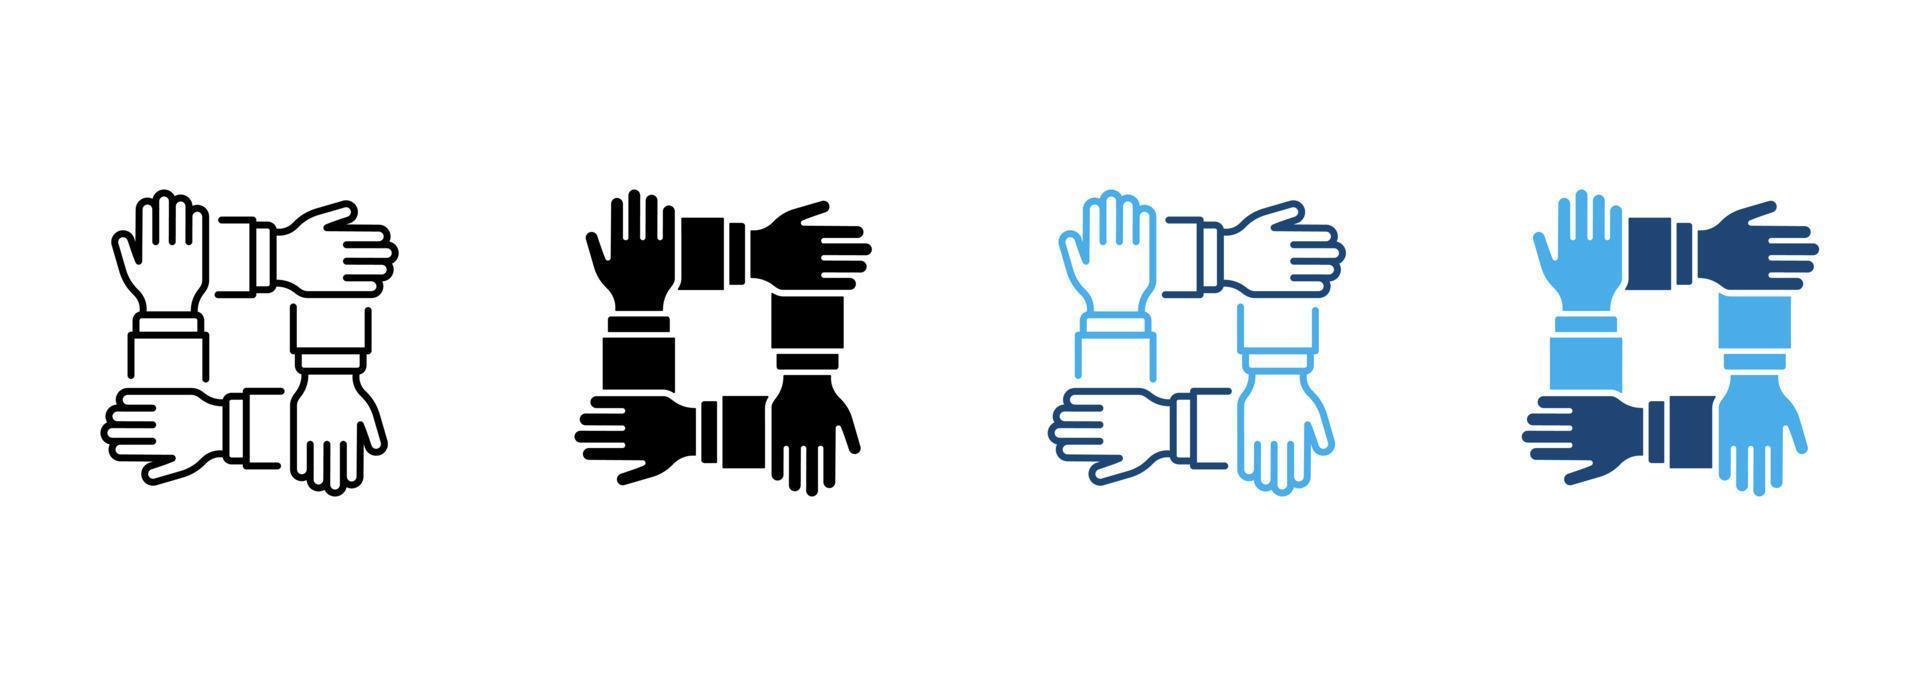 Collaboration Group Team Job Linear Pictogram. Company Participation Line Icon. Teamwork Alliance Partnership Help Together Hand Outline Icon. Editable Stroke. Isolated Vector Illustration.